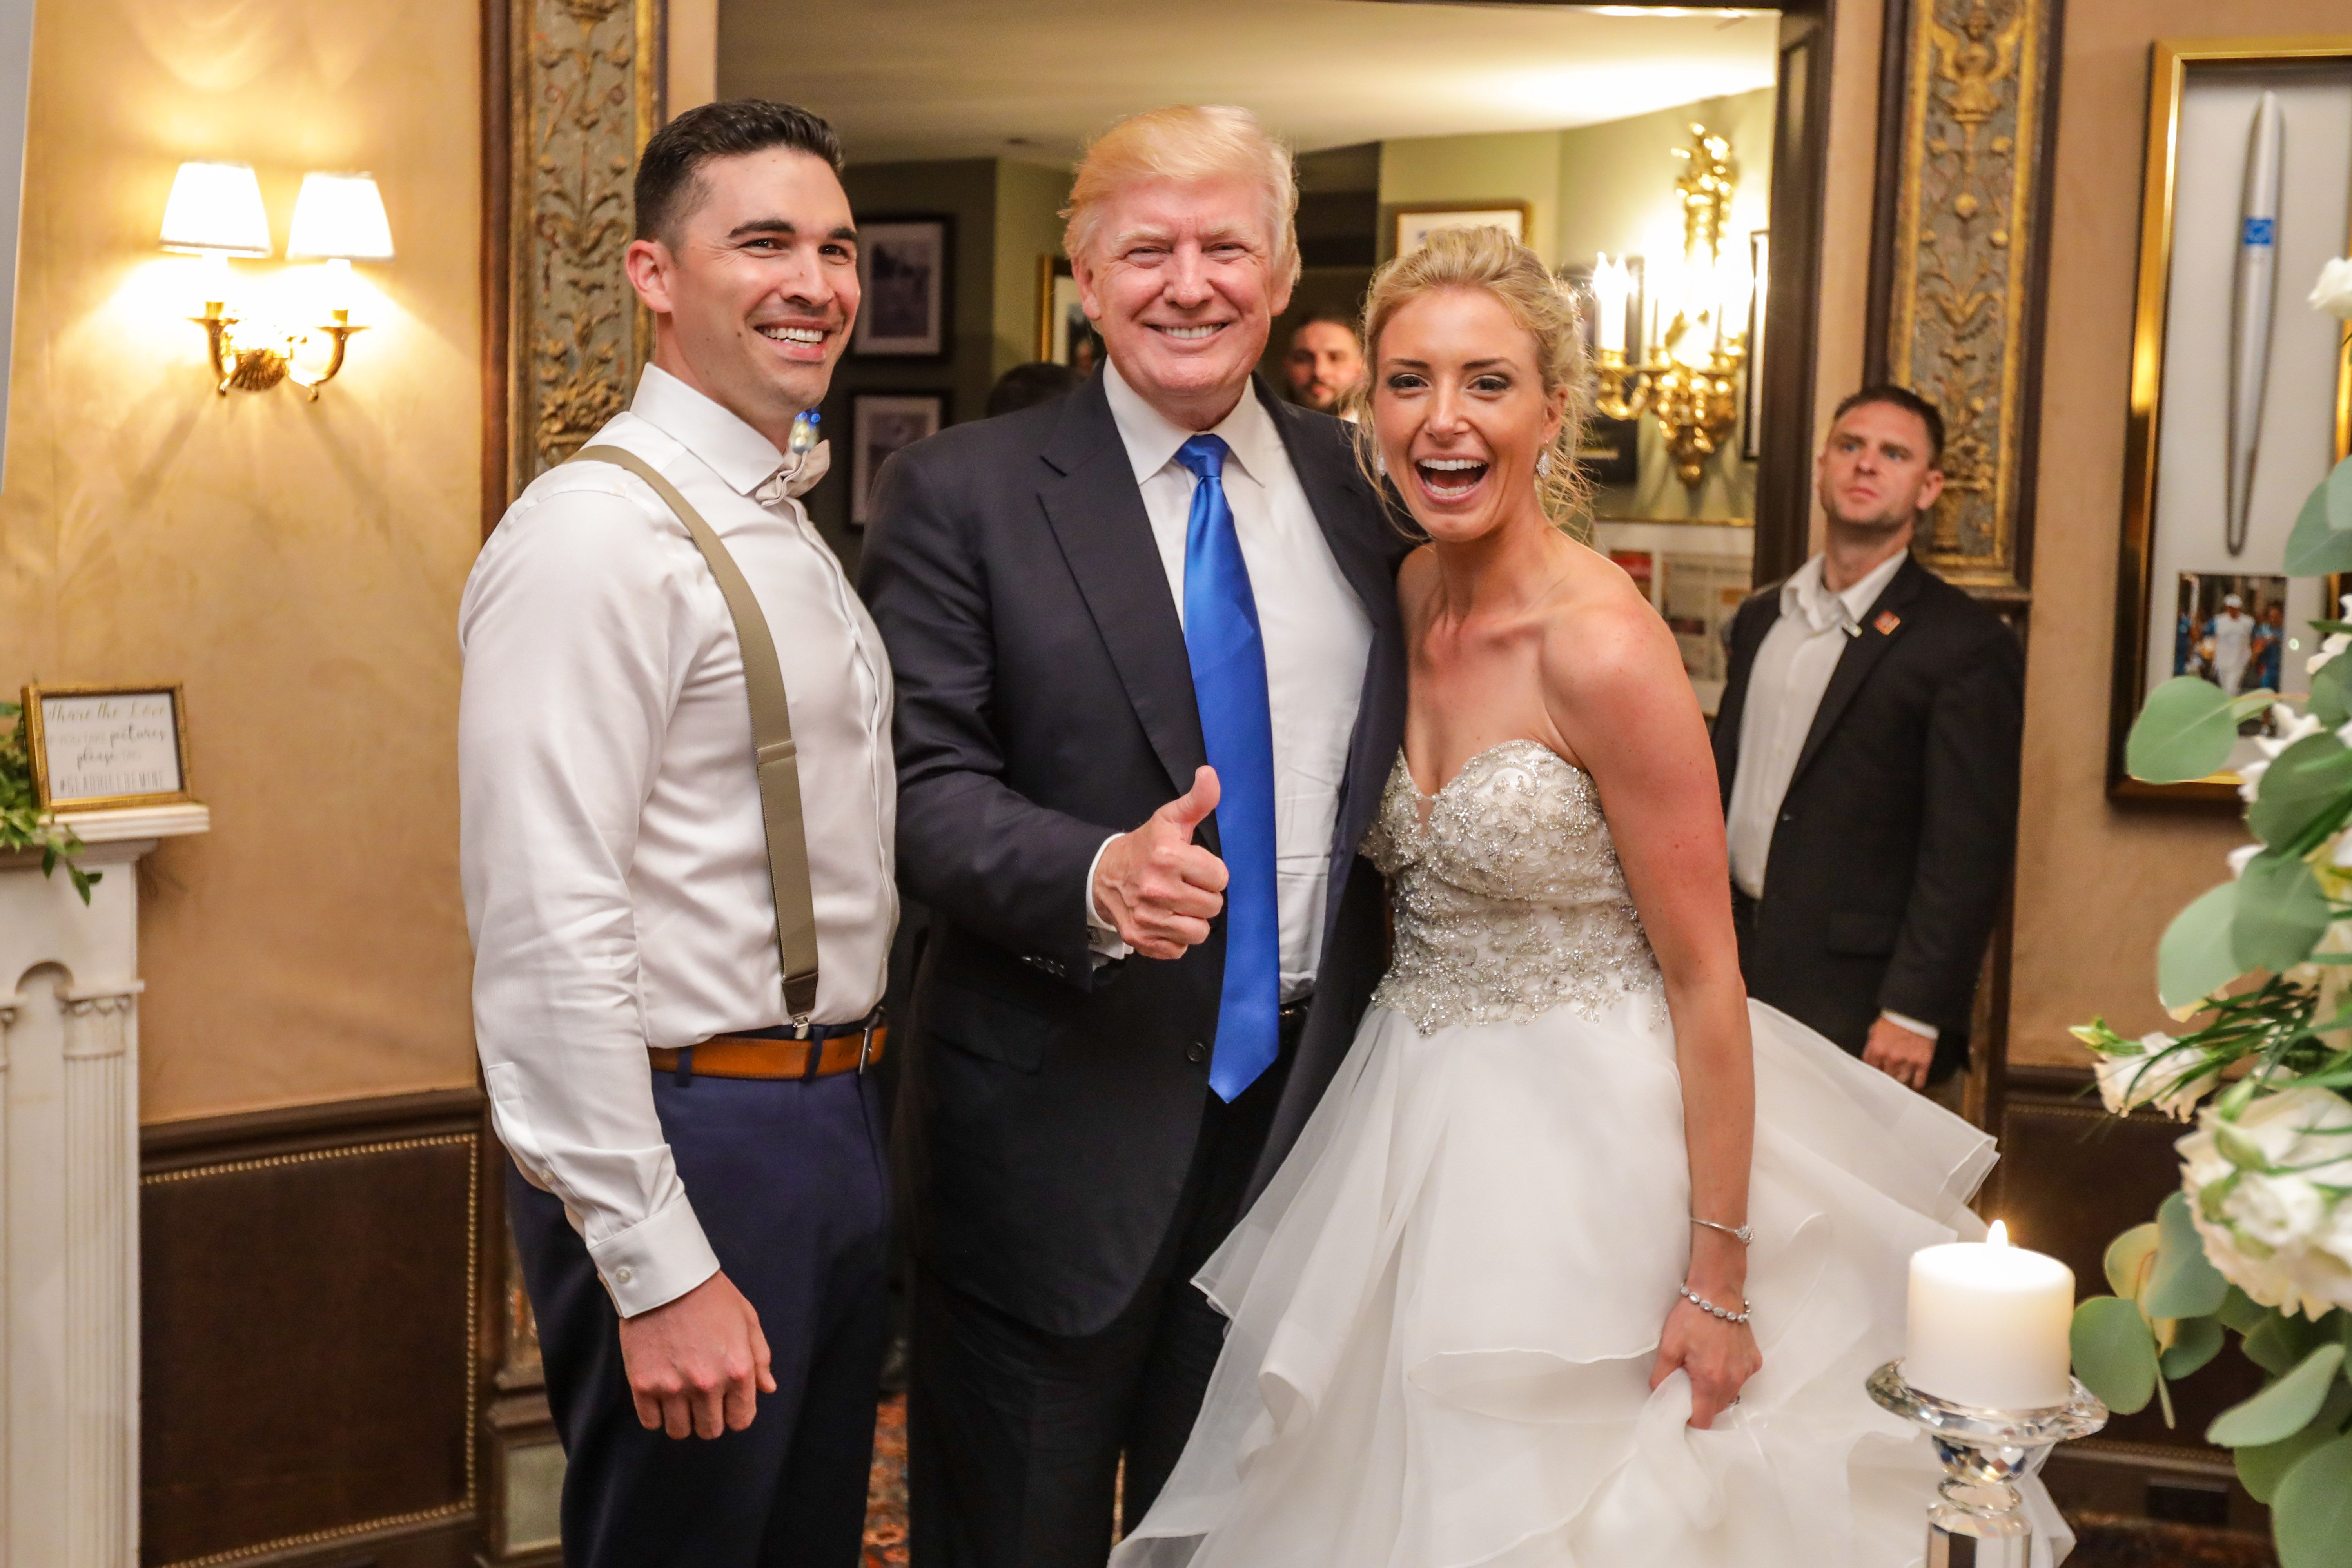 Donald Trump Crashes Wedding In Bedminster Bride Discusses Meeting Trump At Her Reception